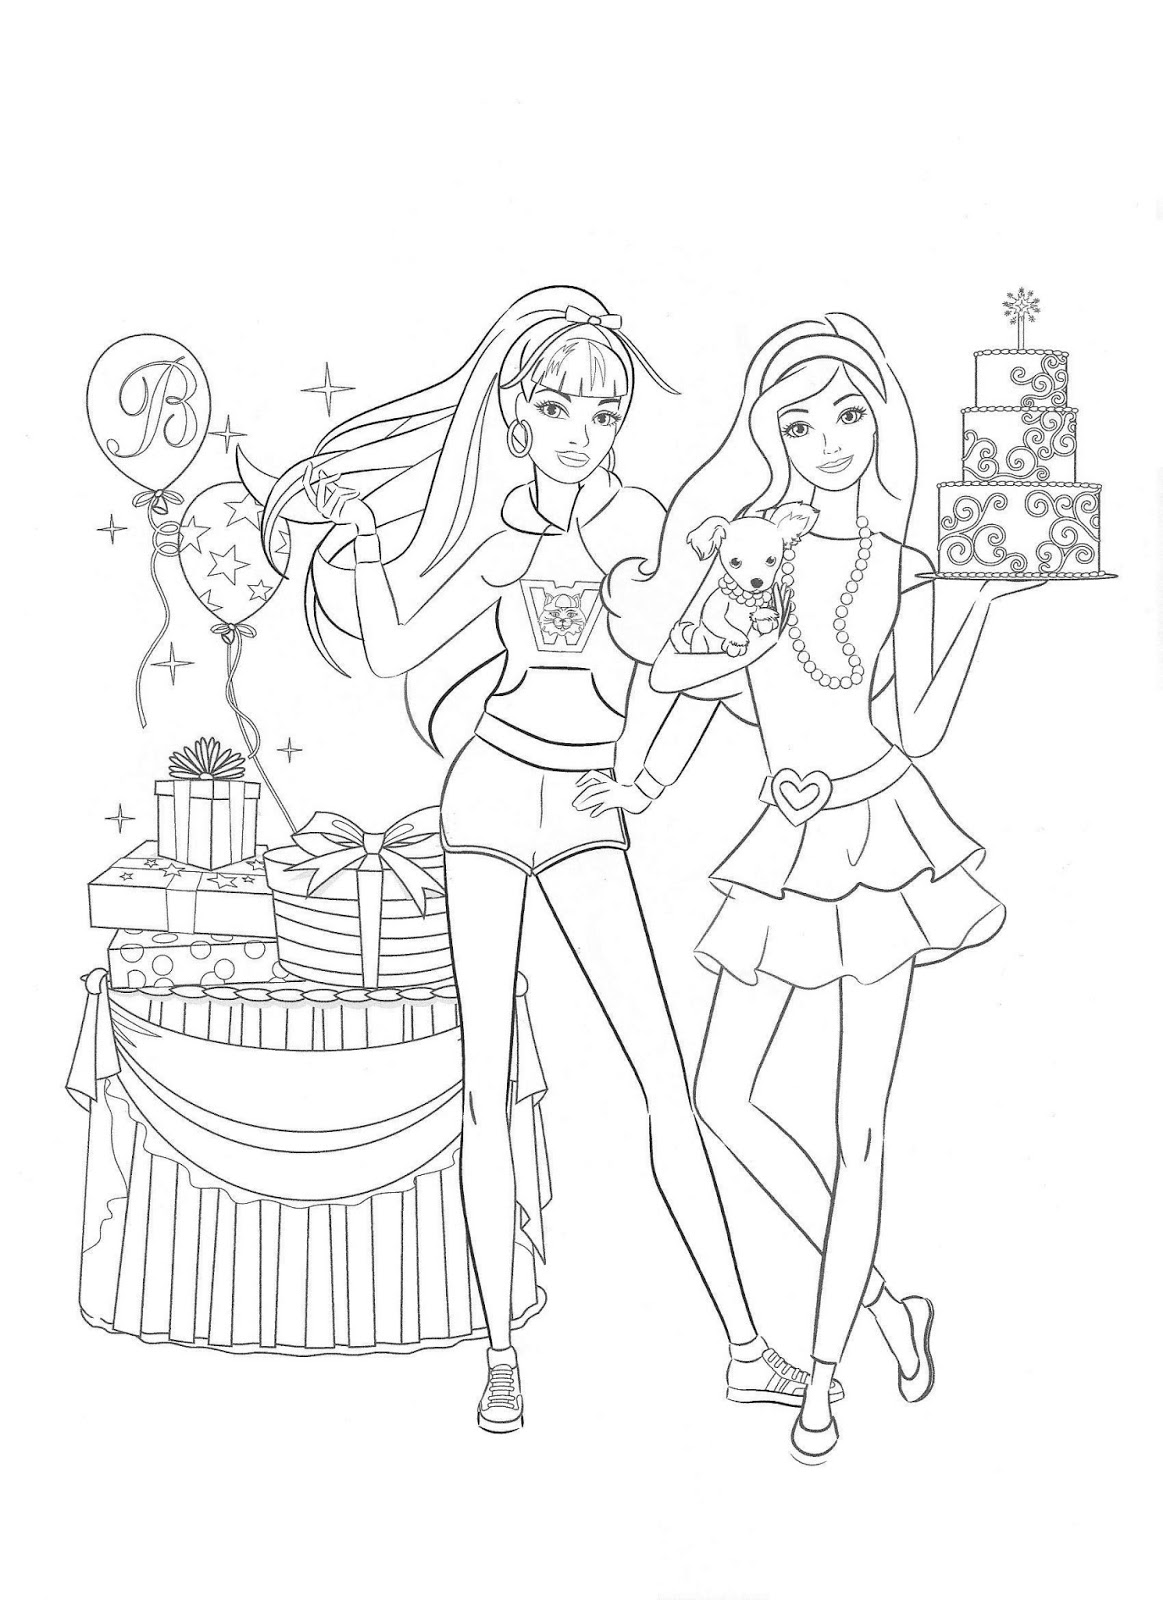  Barbie Cake Coloring Pages | Barbie Coloring Pictures